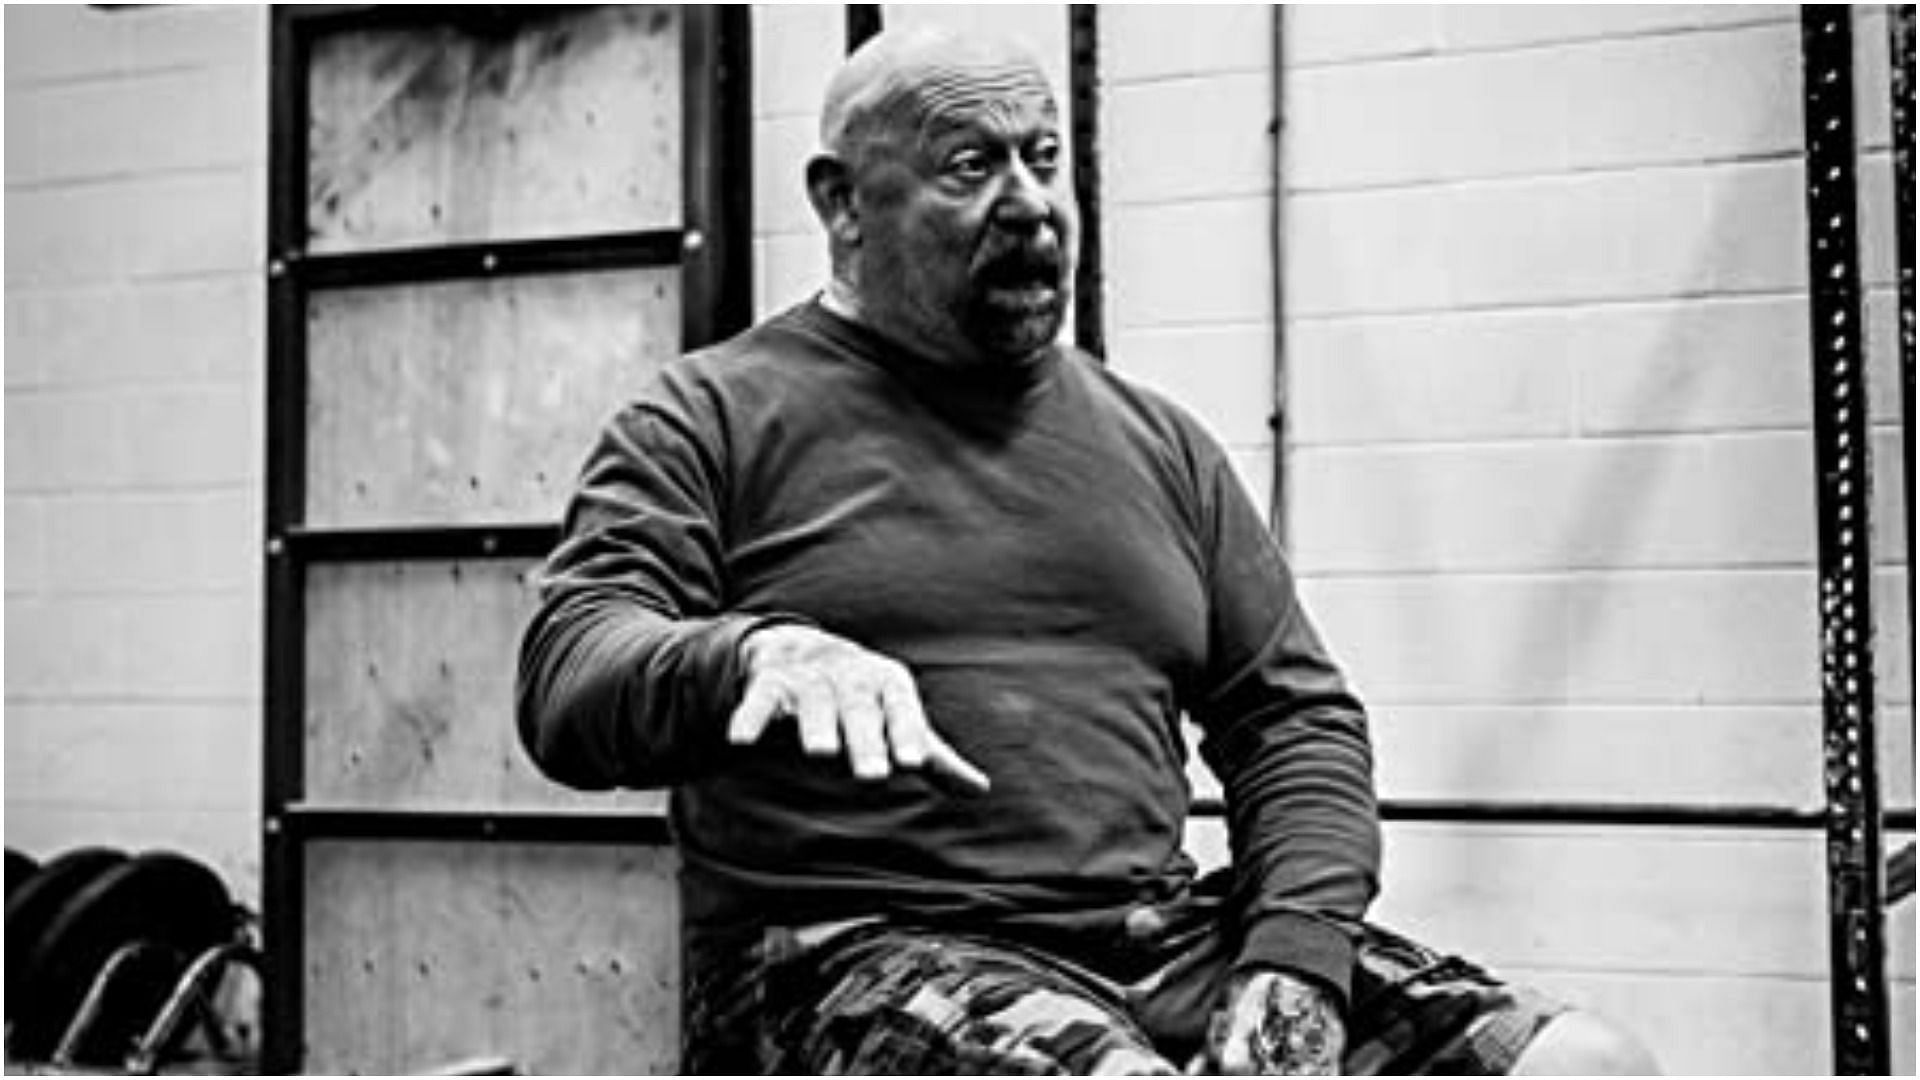 Louie Simmons recently died at the age of 74 (Image via Twitter/KeithGalvin)